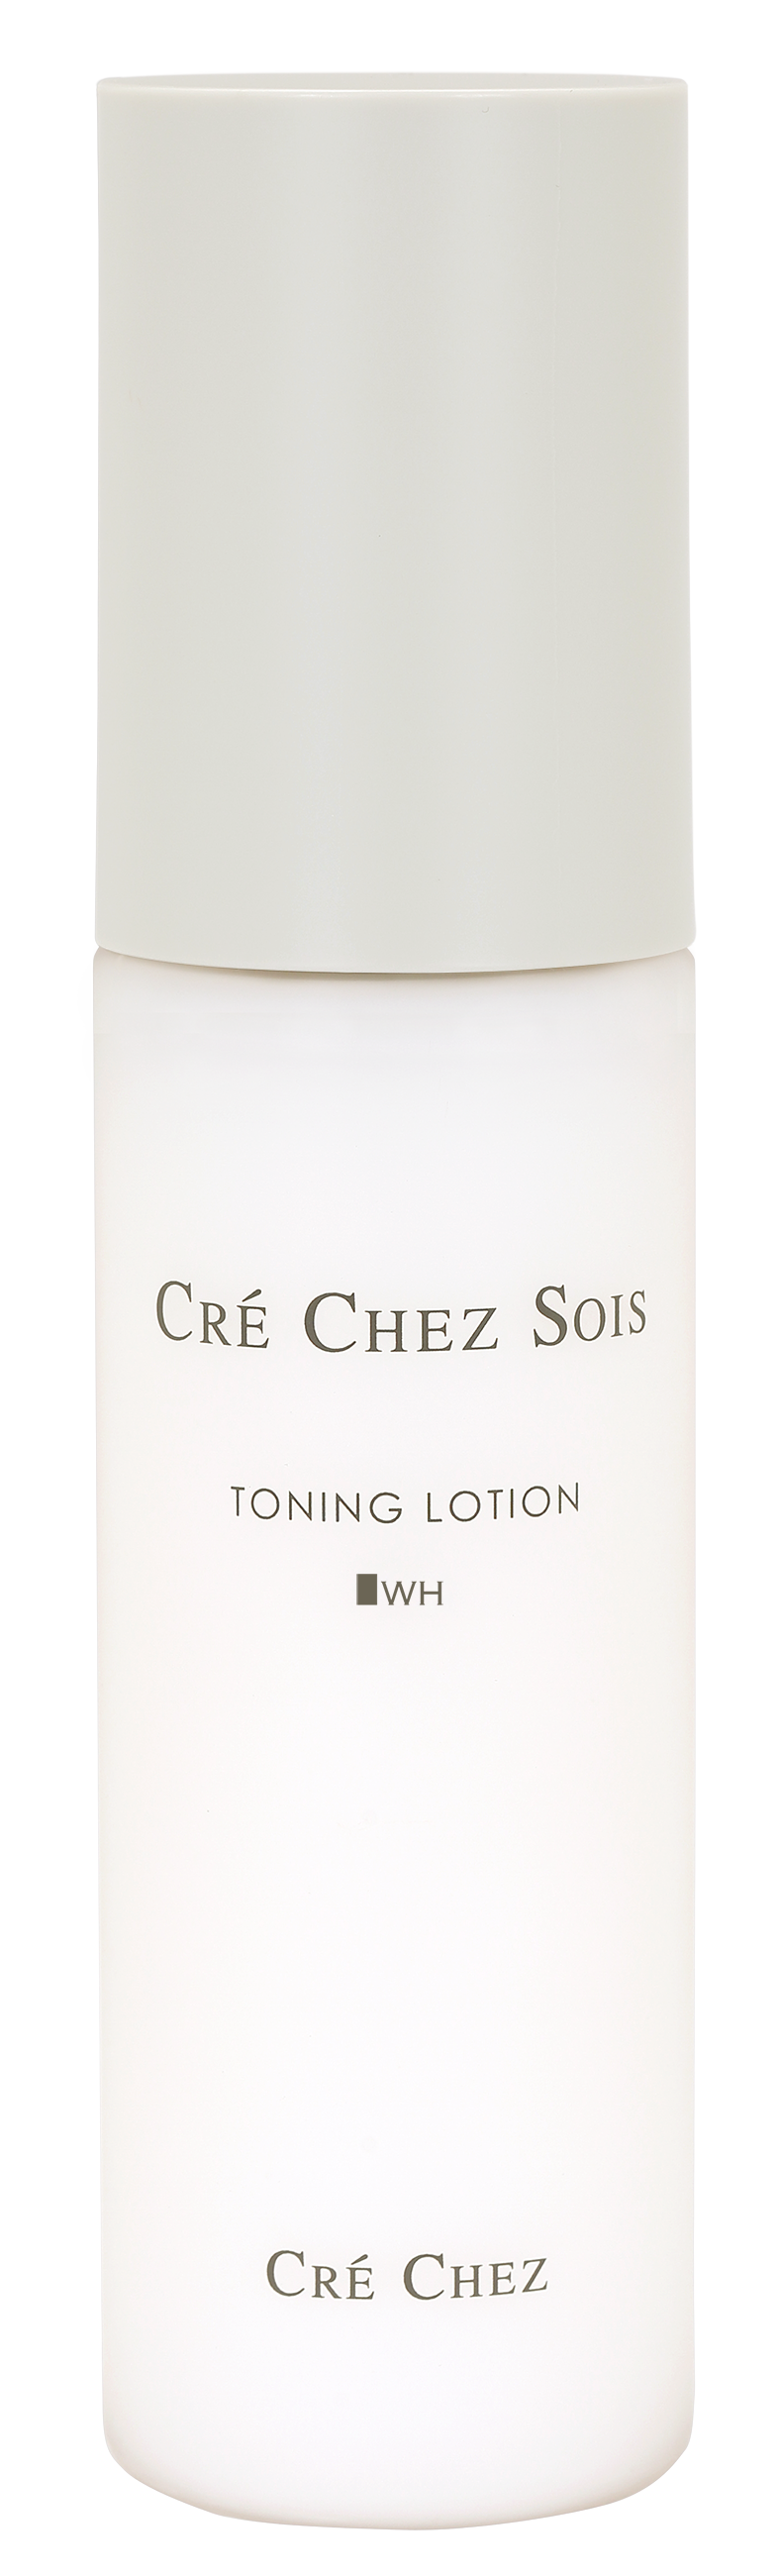 TONING LOTION WH